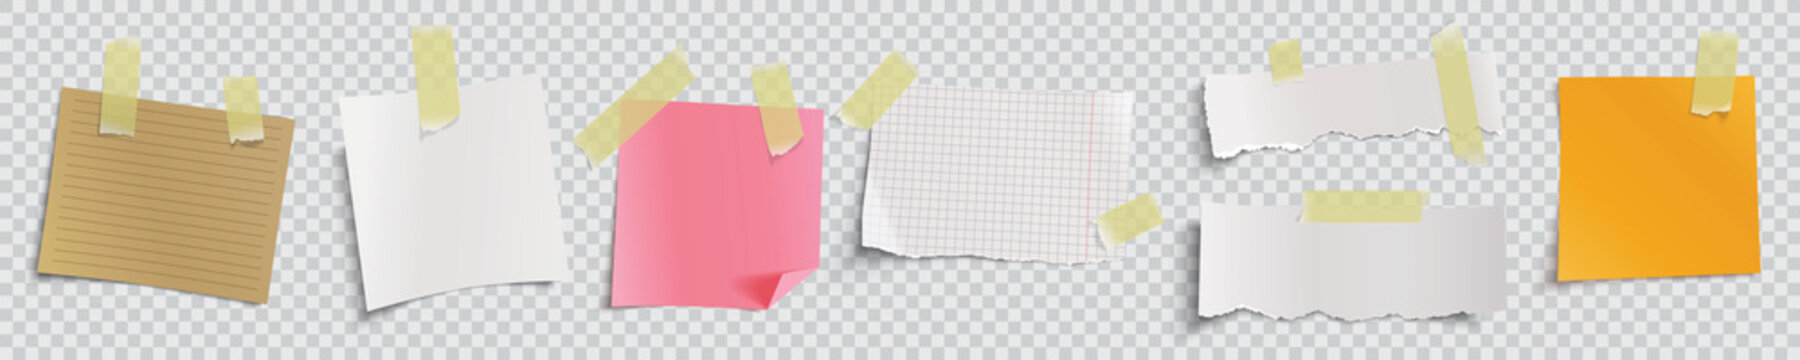 various paper notes attached with tape, vector illustration